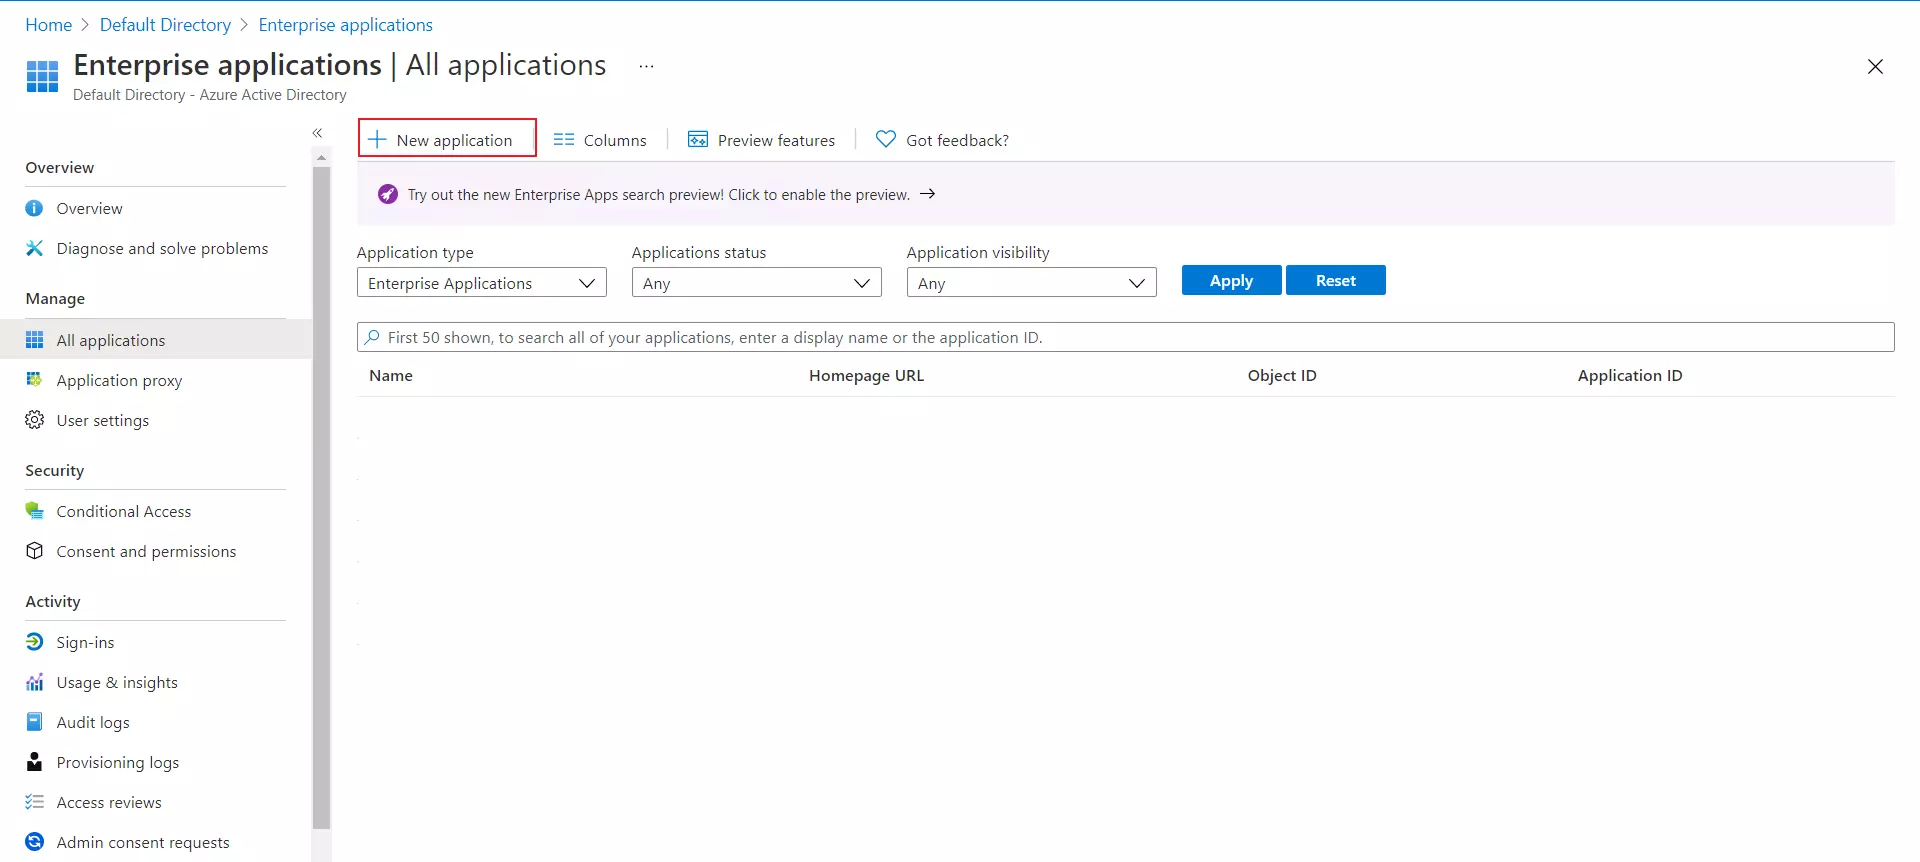 Oracle EBS Azure AD Single Sign-On: Adding New Application